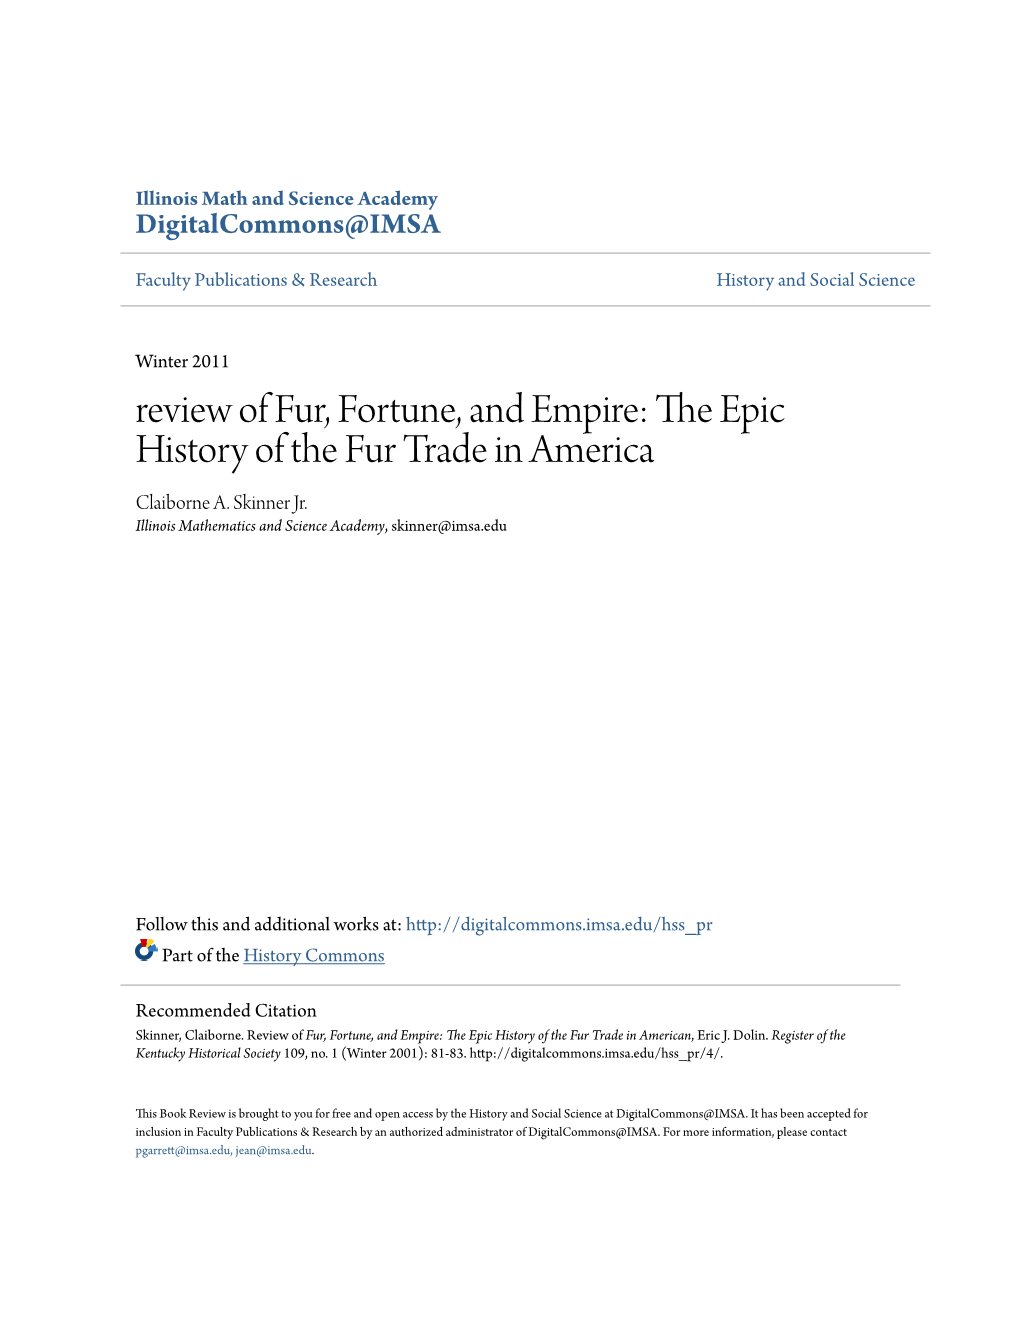 Review of Fur, Fortune, and Empire: the Epic History of the Fur Trade in American, Eric J